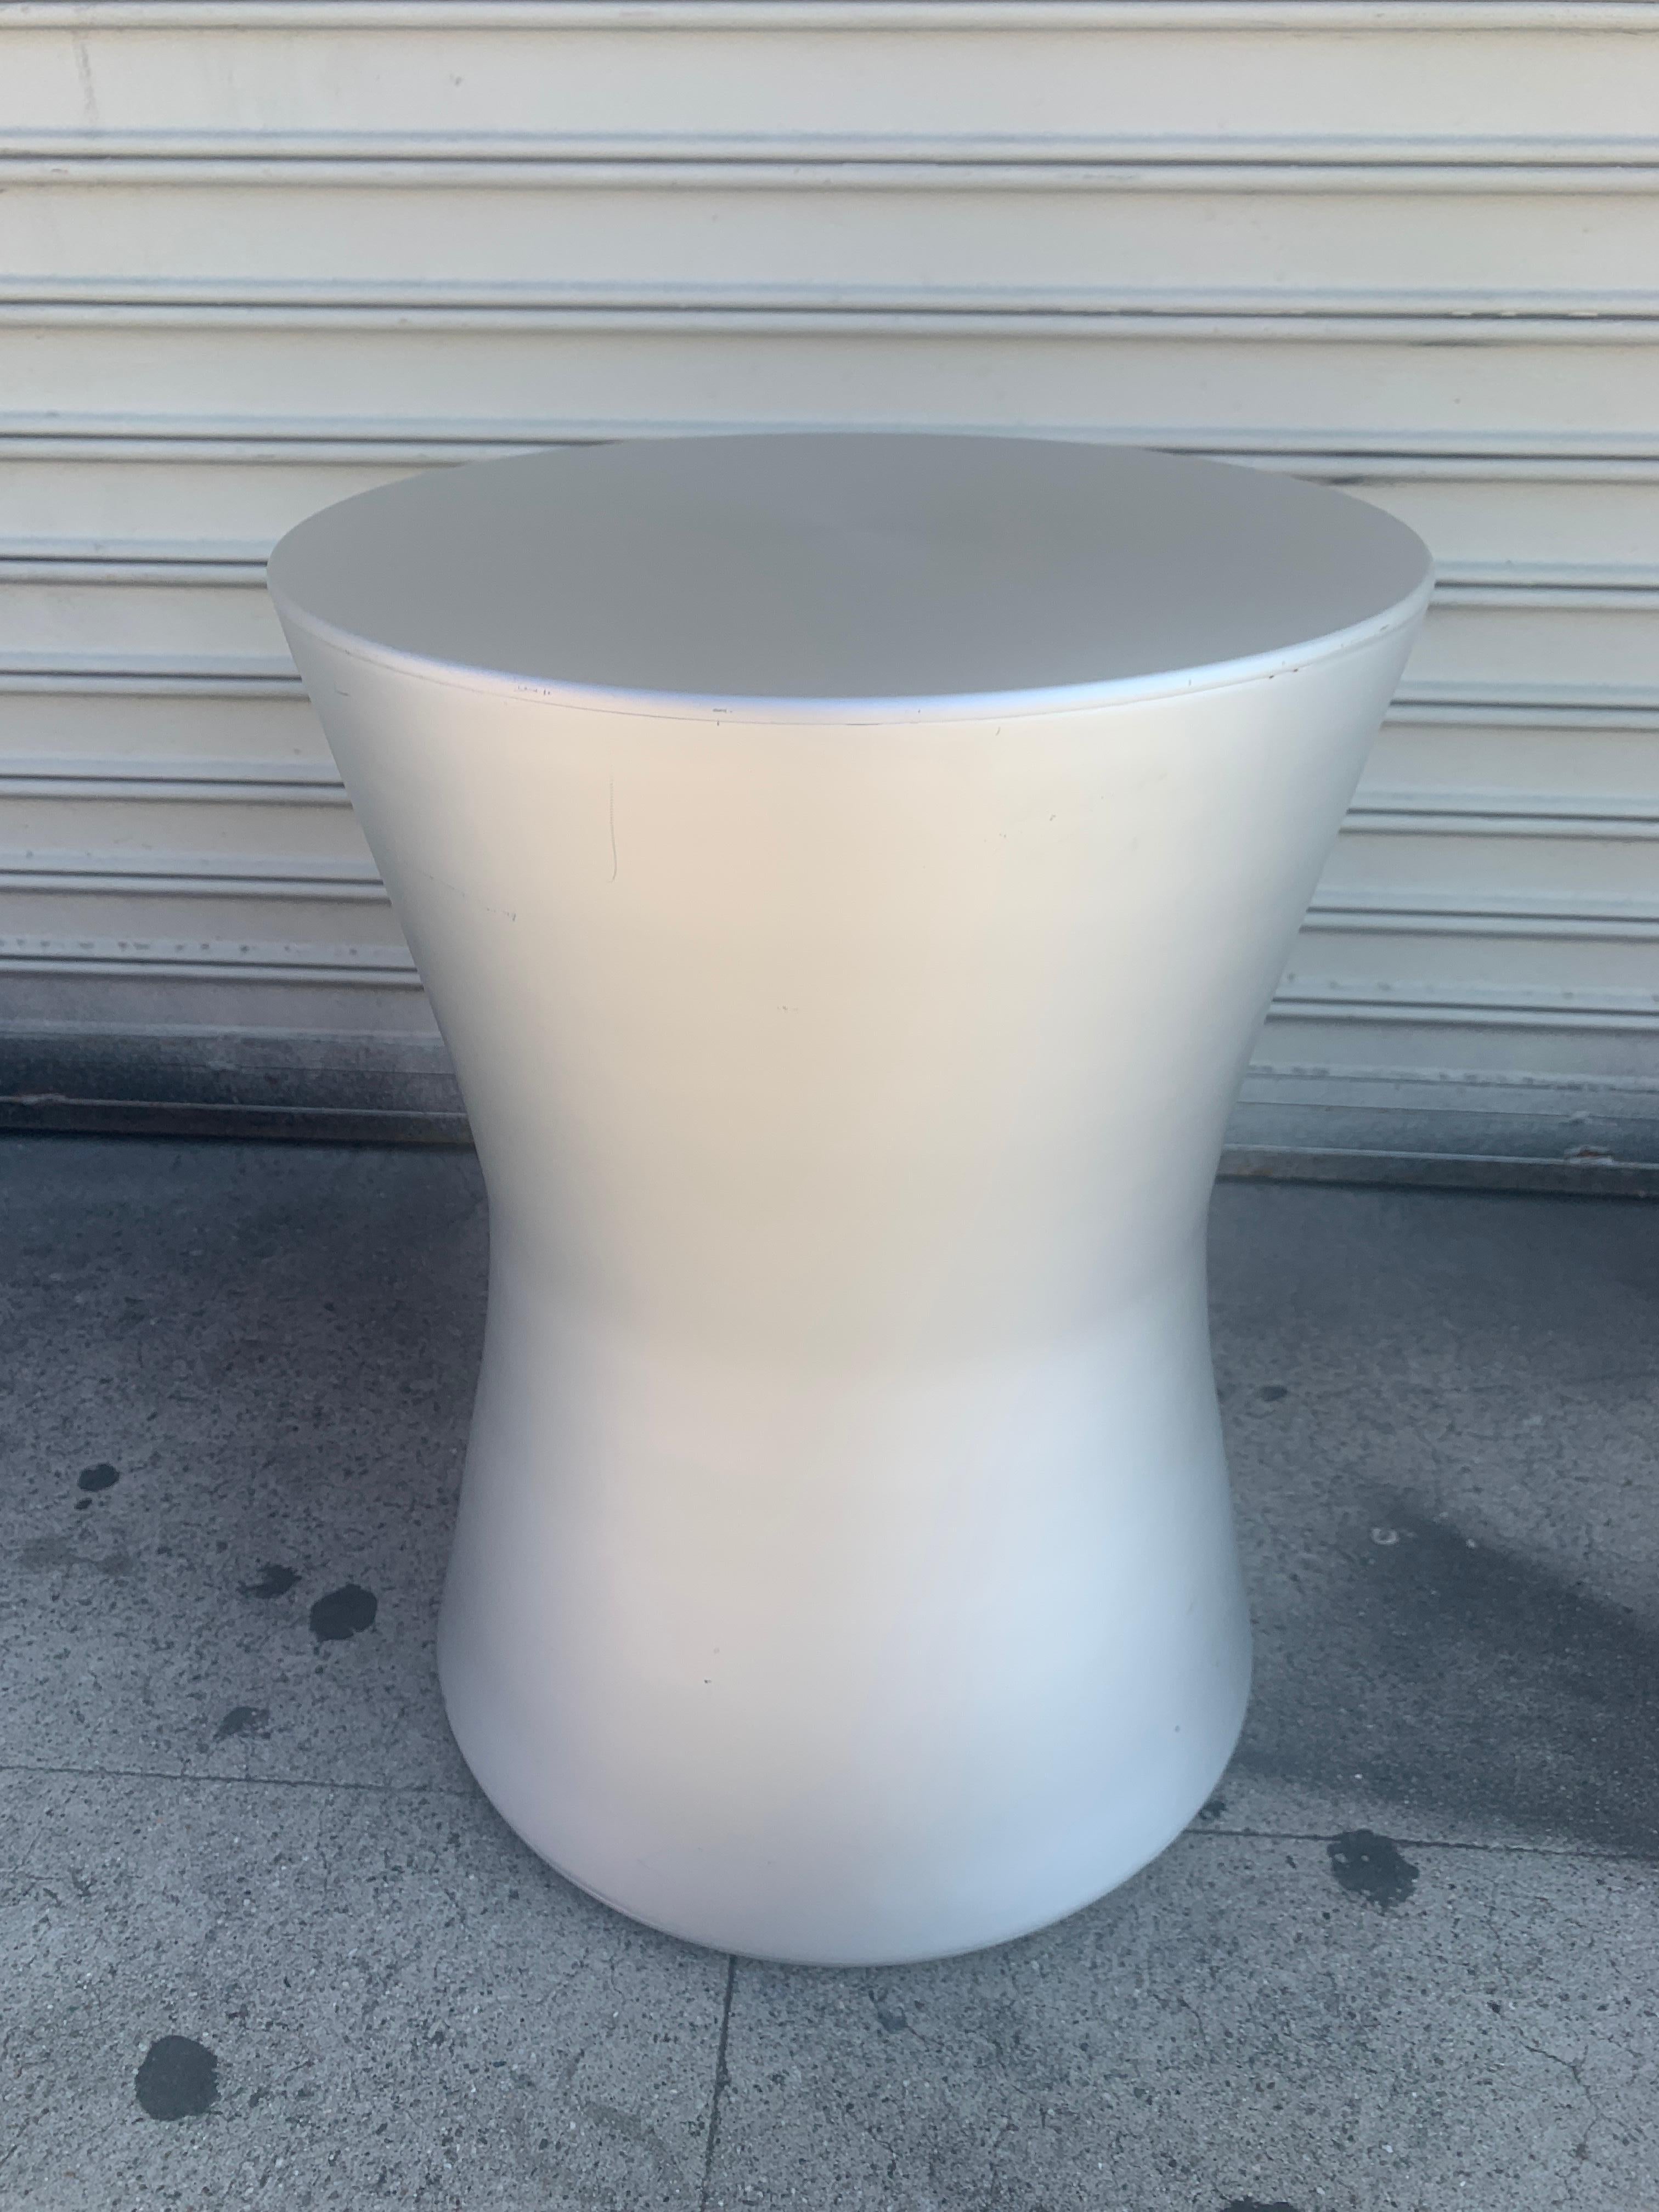 Beautiful aluminum table designed and manufactured by Martin Brattrud and part of the MAKAILA collection.
Measurements: 20.5 inches high x 15 inches in diameter.

Bold simplicity meets Frank utility. This light aluminum table is practical enough